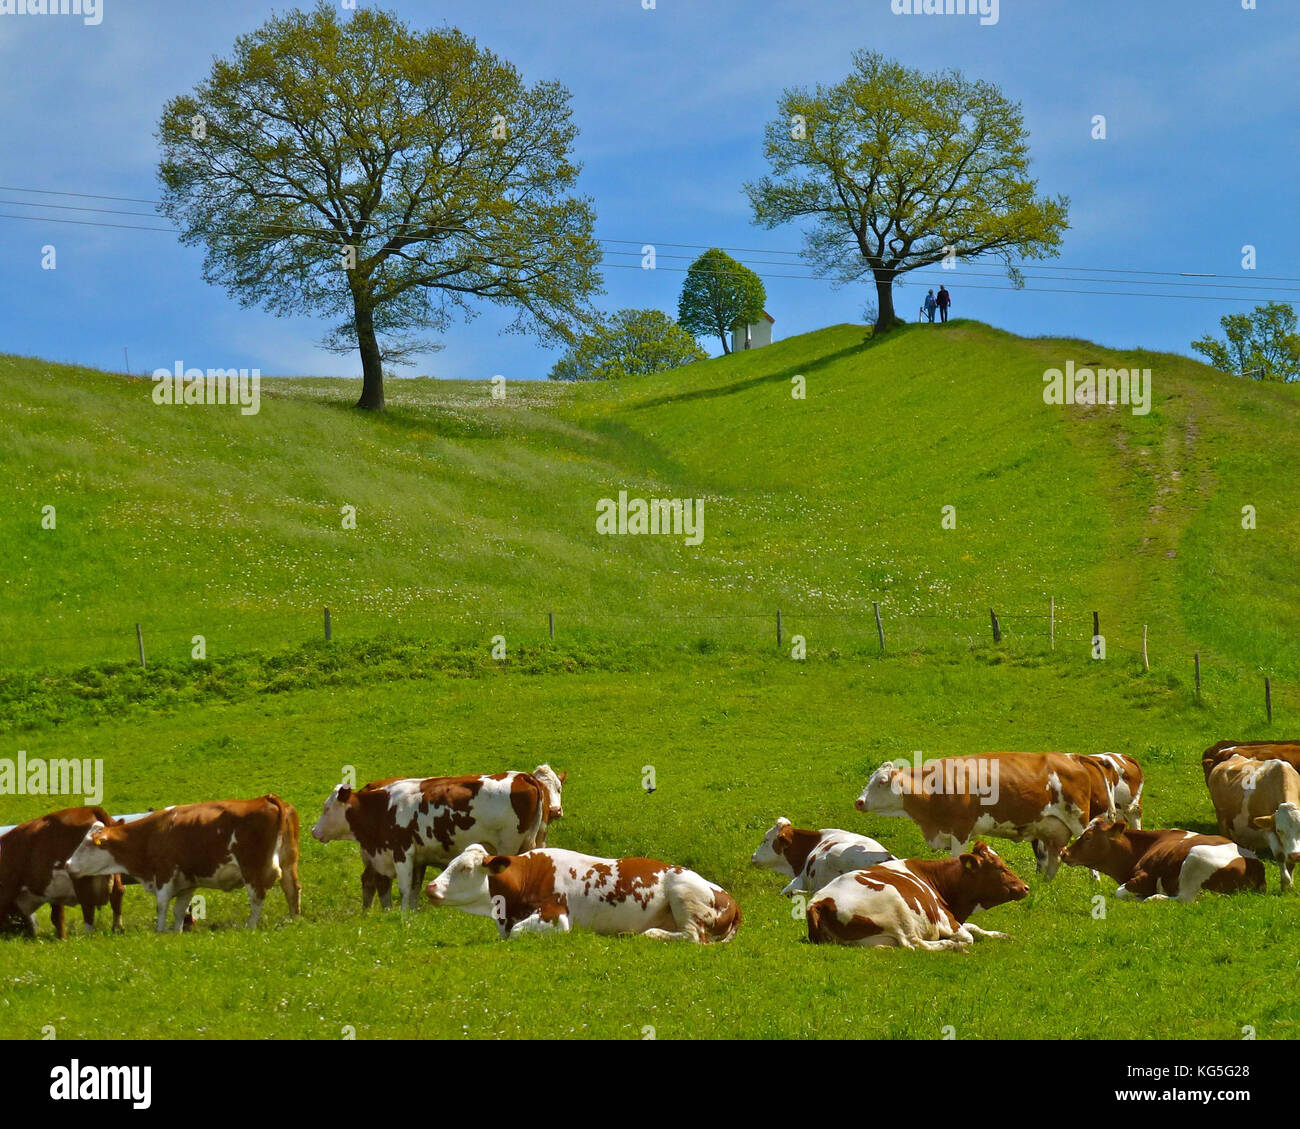 Germany, Bavaria, herd of cattle in the Aidlinger Höhe, pasture fence, Riegsee, chapel, wanderer, trees, blue heaven, spring Stock Photo